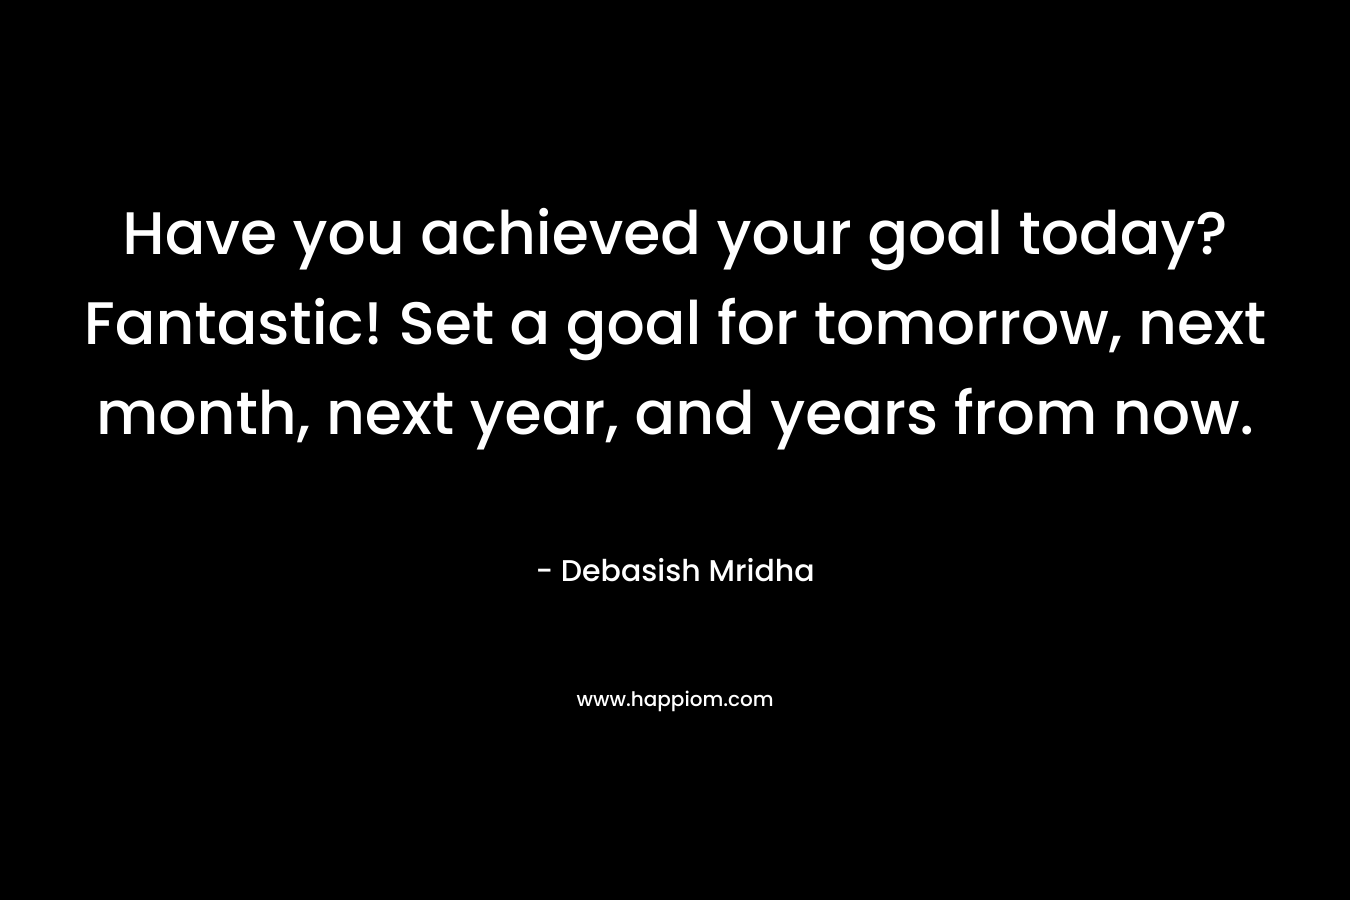 Have you achieved your goal today? Fantastic! Set a goal for tomorrow, next month, next year, and years from now.